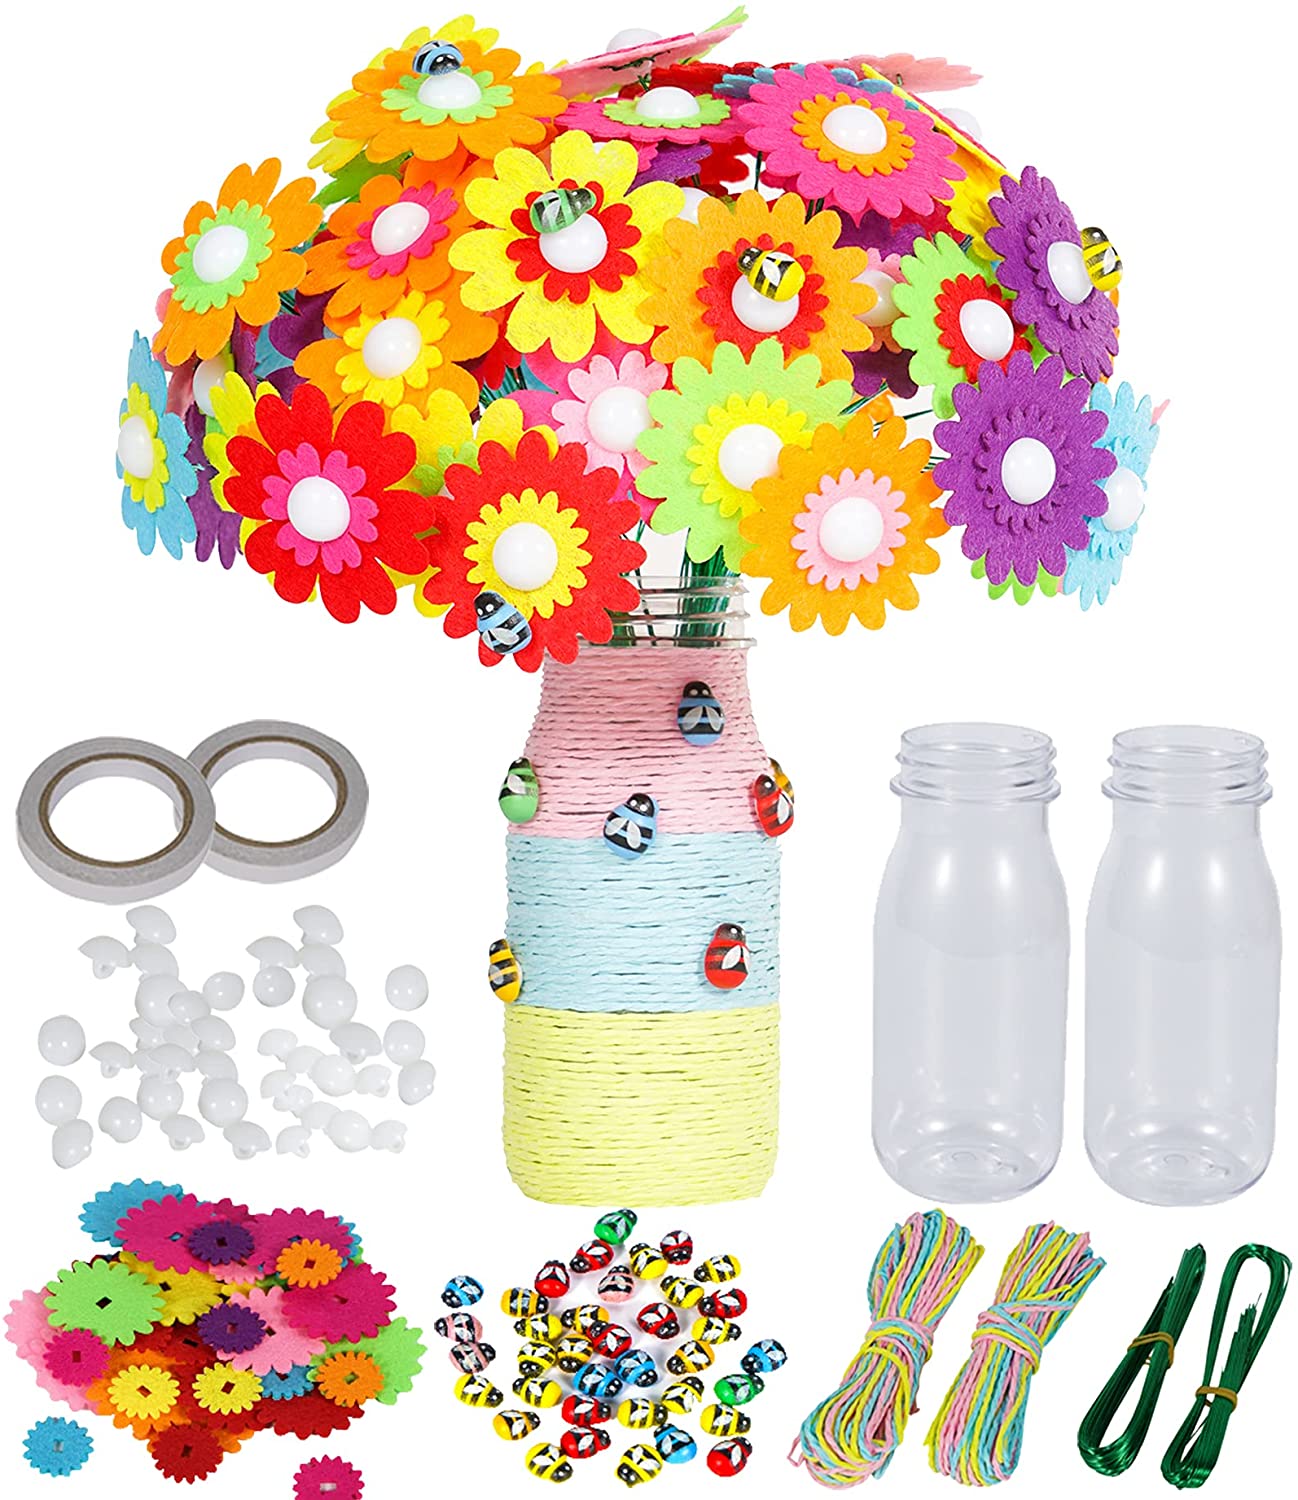 Crafts and Art Set Gift for Girls Boys Age 4 5 6 7 8 9 10 12 Years Old Make Your Own Flower Bouquet with Buttons and Fabric Flowers DigHealth DIY Vase with Flowers Craft Kit for Kids 